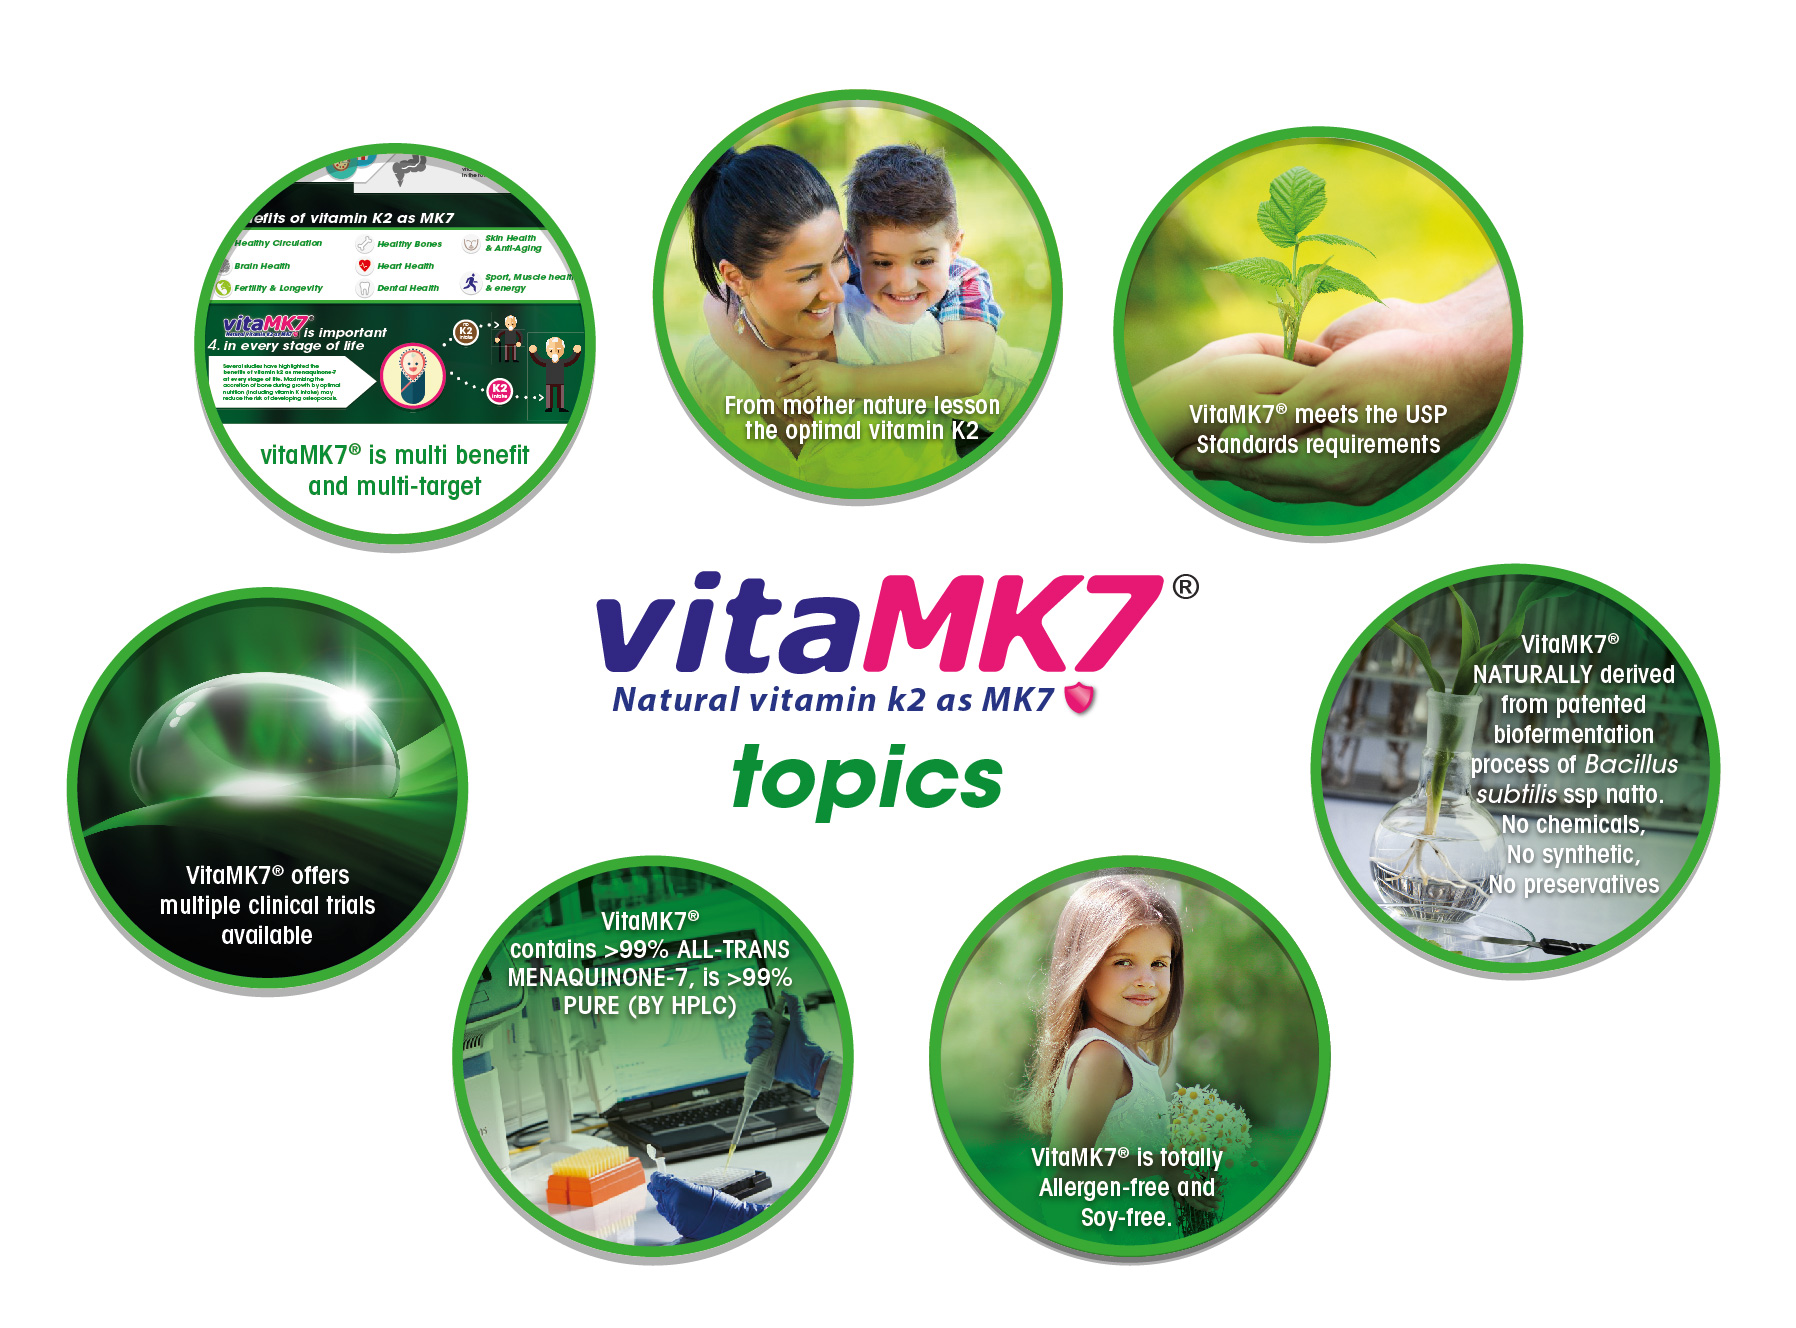 Vitamin K2 standard reference from Gnosis